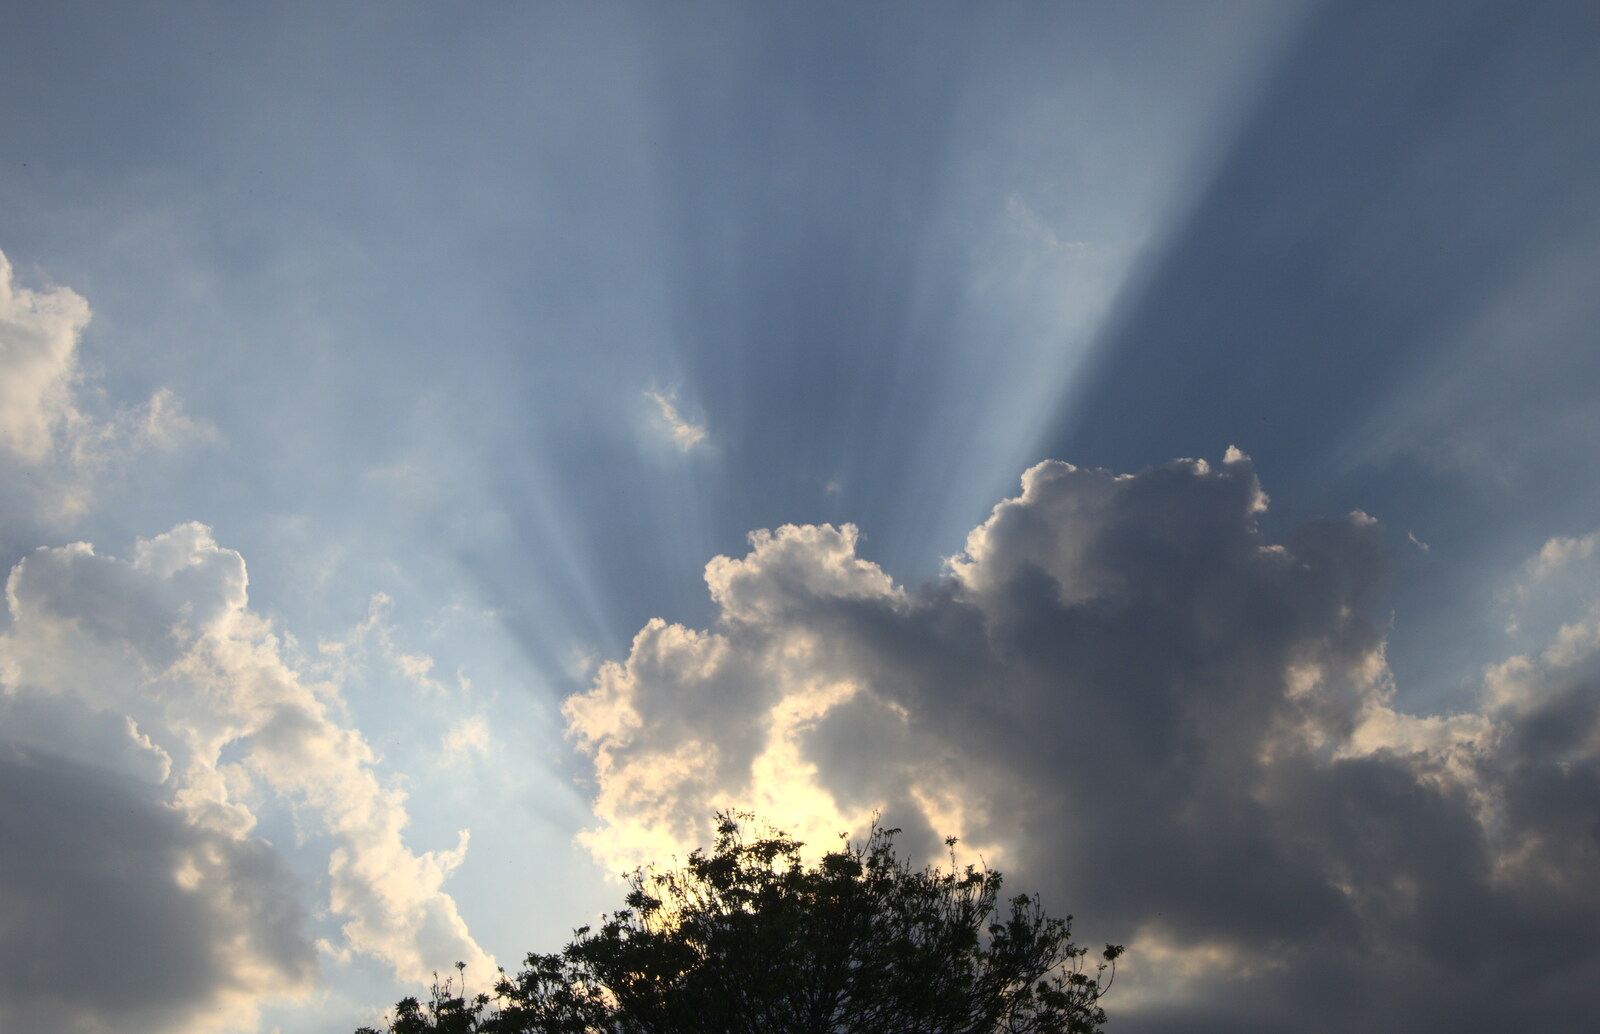 The BBs at the White Hart, Roydon, Norfolk - 1st June 2012: Some impressive crepuscular rays over the side field